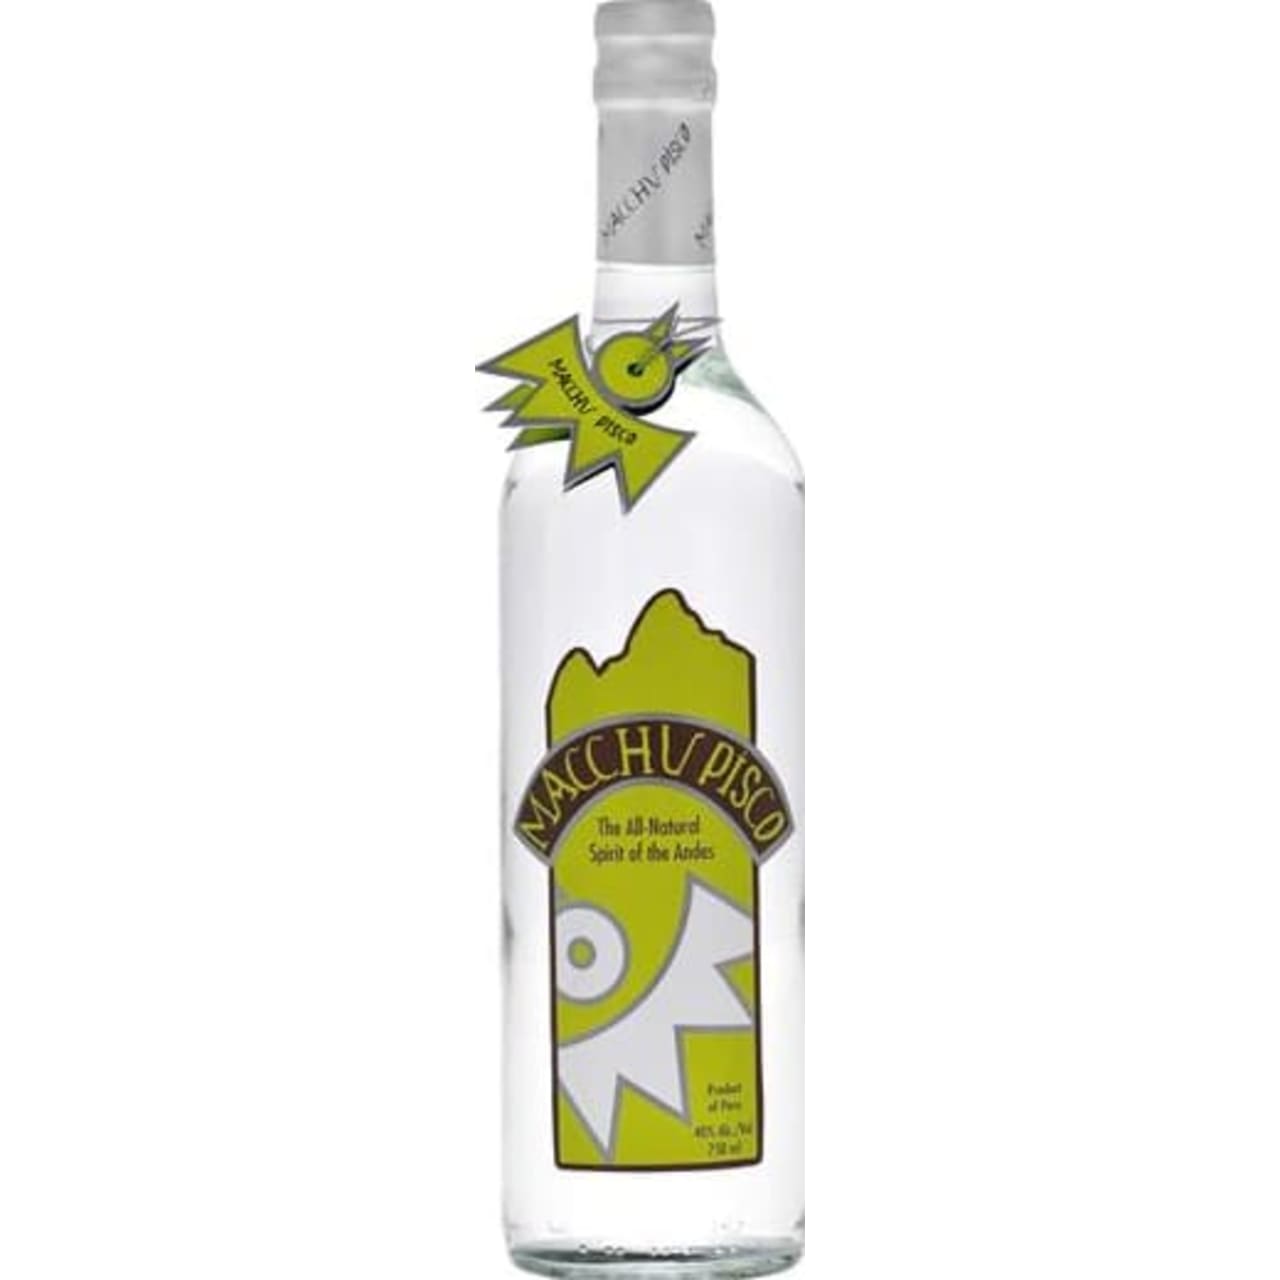 Macchu Pisco is a Peruvian pisco made from Quebranta grapes and then rested for one year to allow the spirit to mellow and reveal its true character.